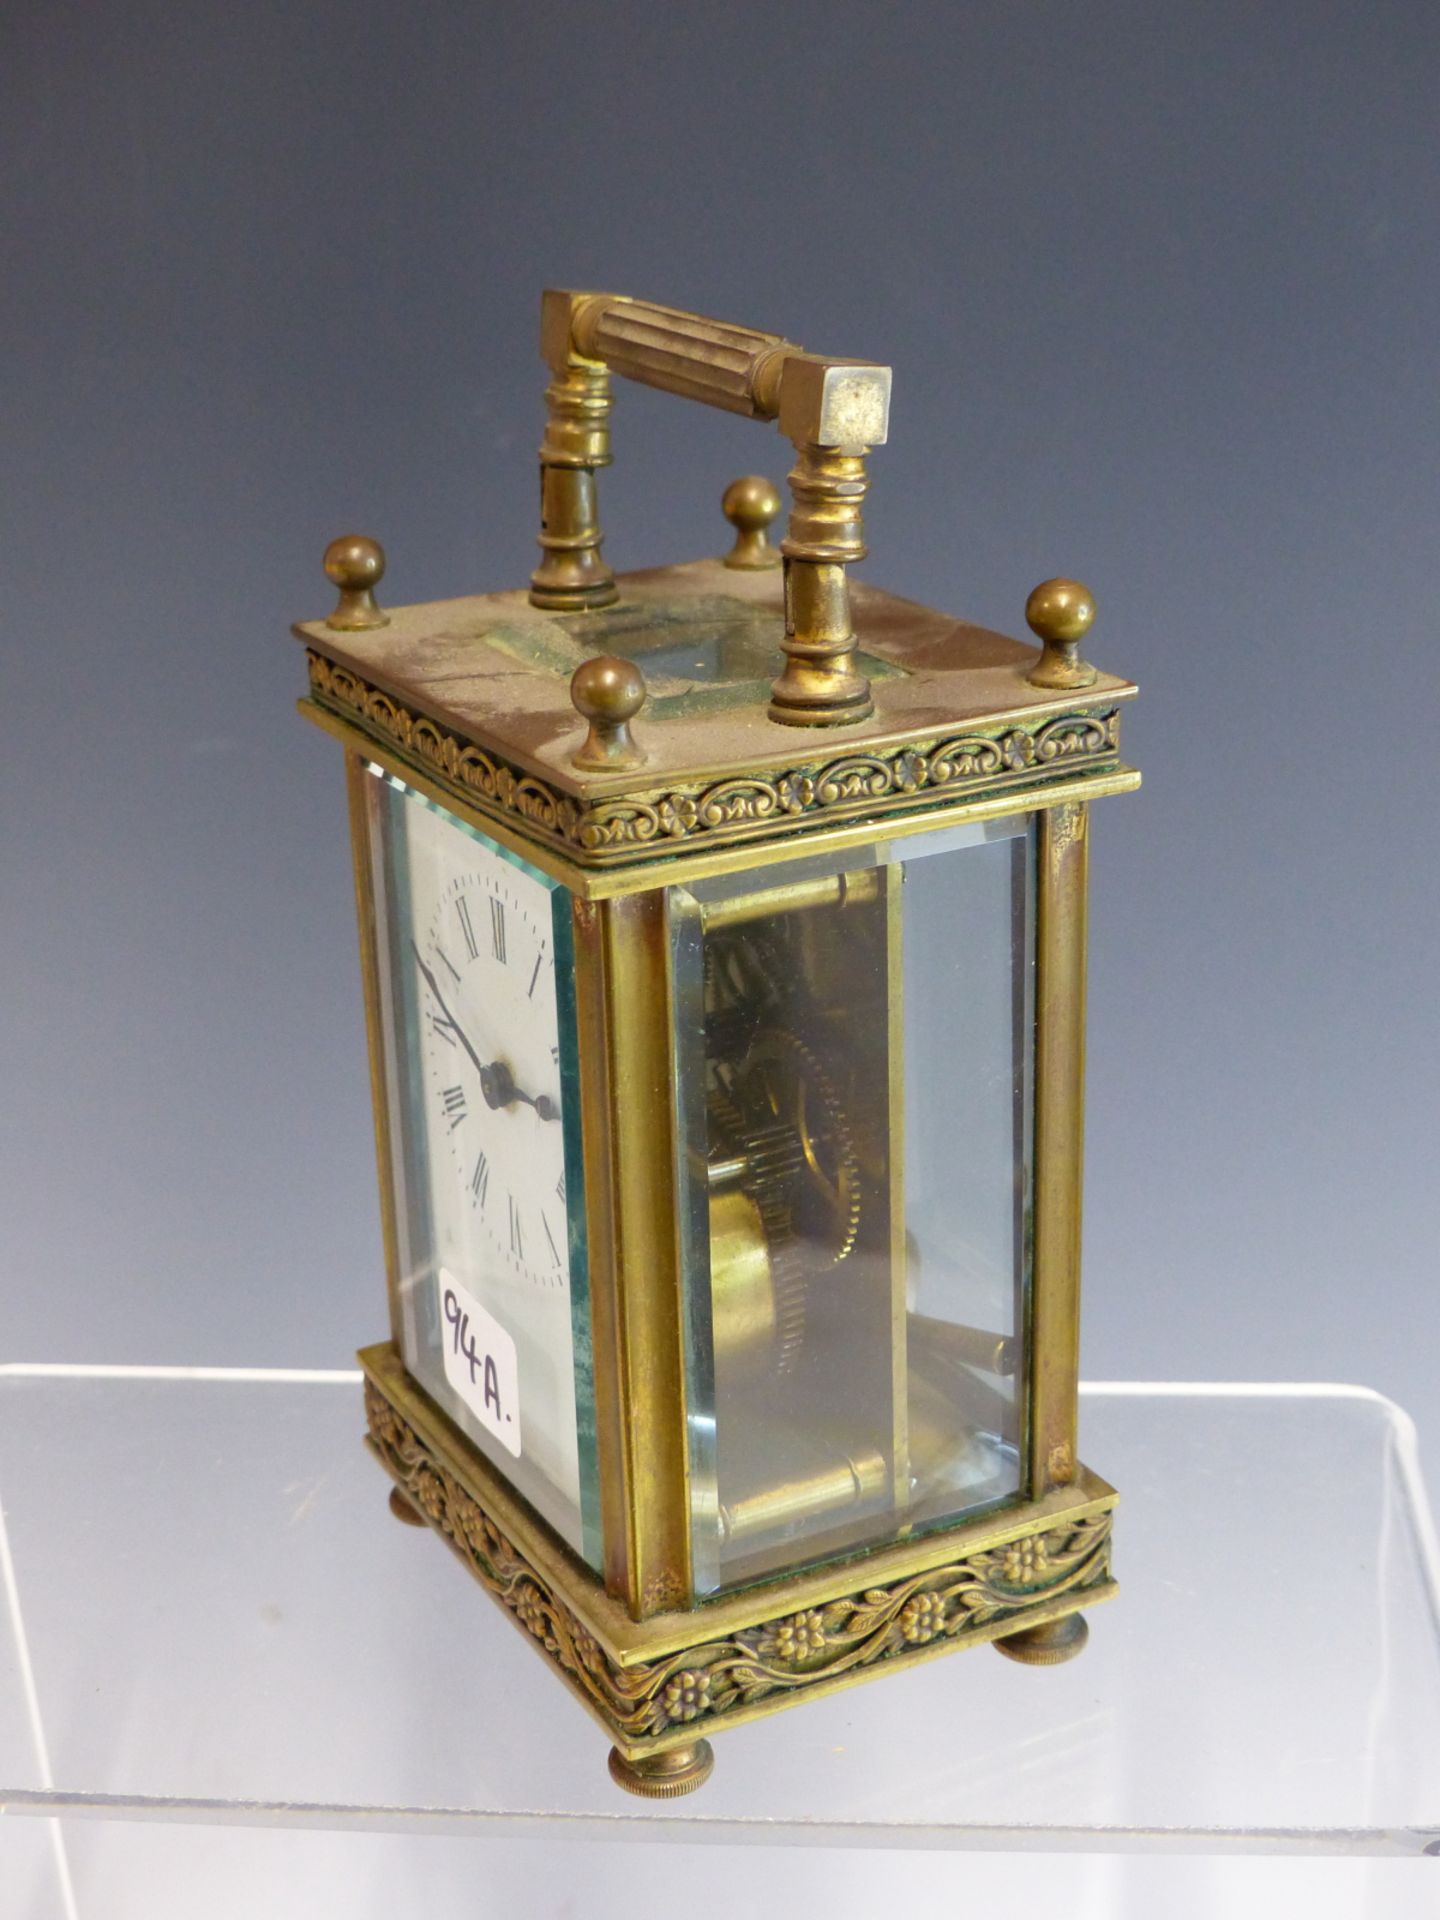 AN EARLY 20TH CENTURY BRASS CASED CARRIAGE CLOCK WITH WHITE ENAMEL DIAL. - Image 2 of 3